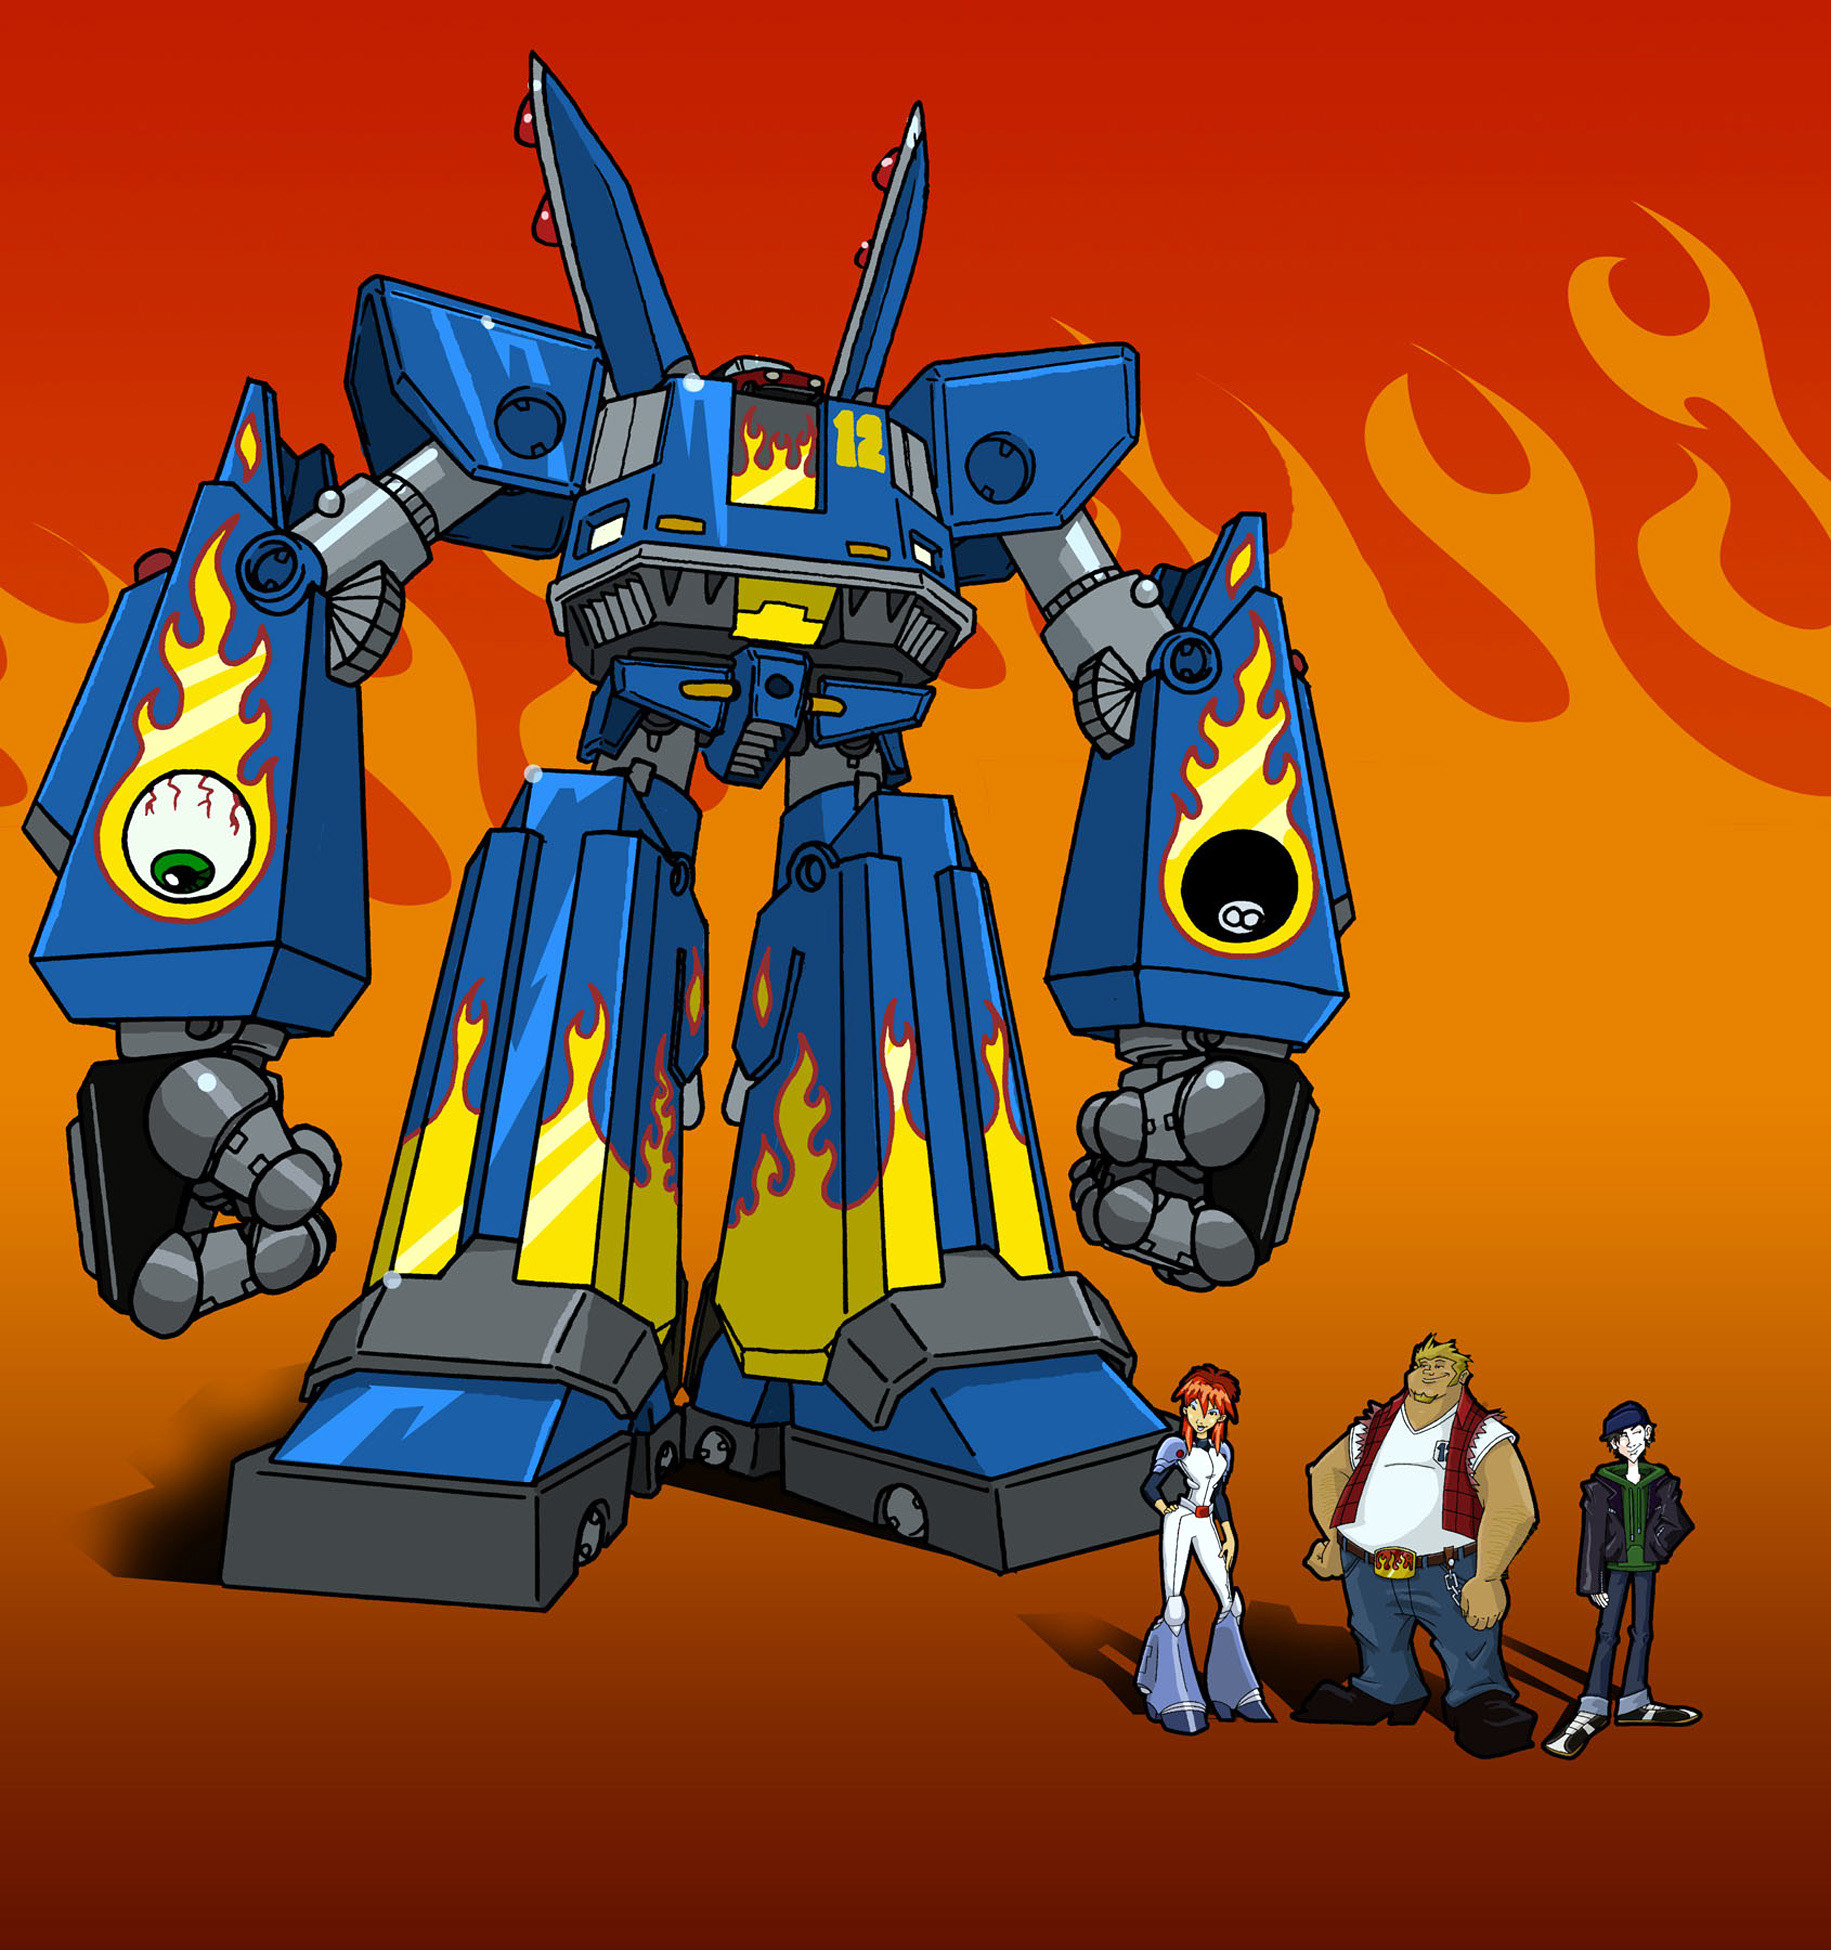 Megas, a giant robot, stands towering over its human counterparts, Kiva, Coop and Jamie